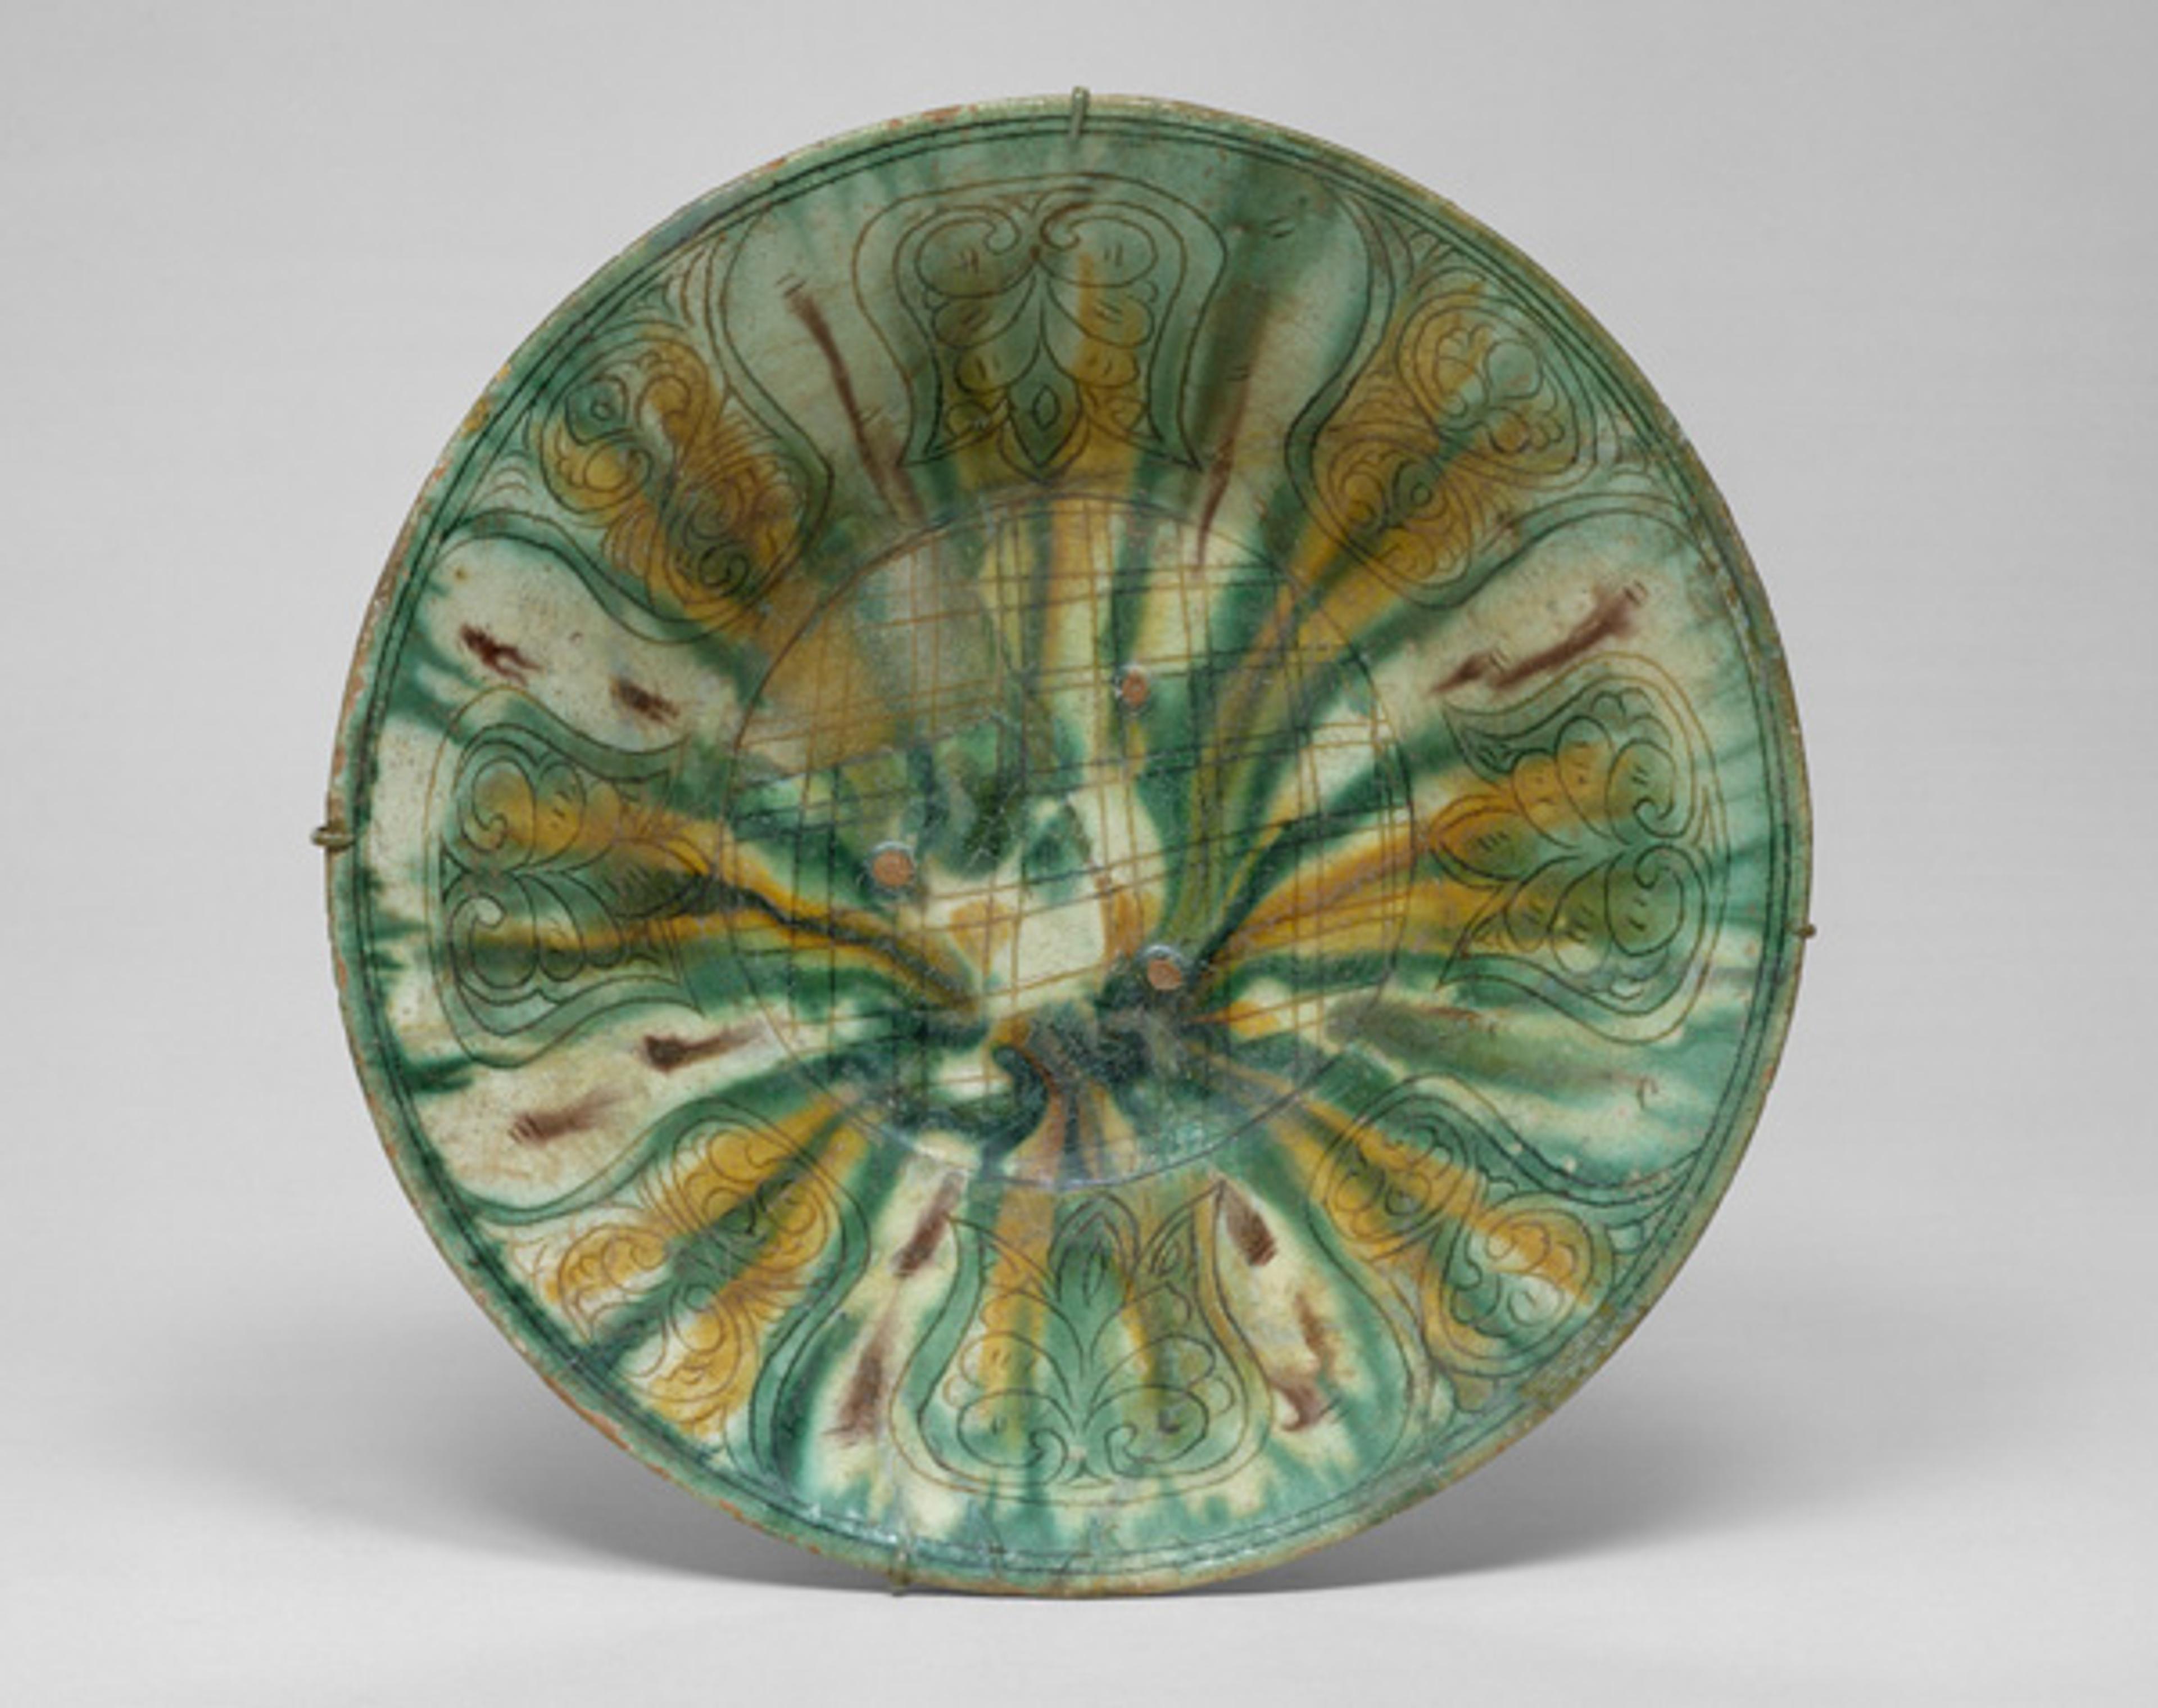 Bowl with Green, Yellow, and Brown Splashed Decoration, 10th century. Iran, Nishapur. Islamic. Earthenware; white slip, incised and splashed with polychrome glazes under transparent glaze (sgraffito ware); H. 2 7/8 in. (7.3 cm), Diam. 10 1/4 in. (26 cm). The Metropolitan Museum of Art, New York, Rogers Fund, 1938 (38.40.137)